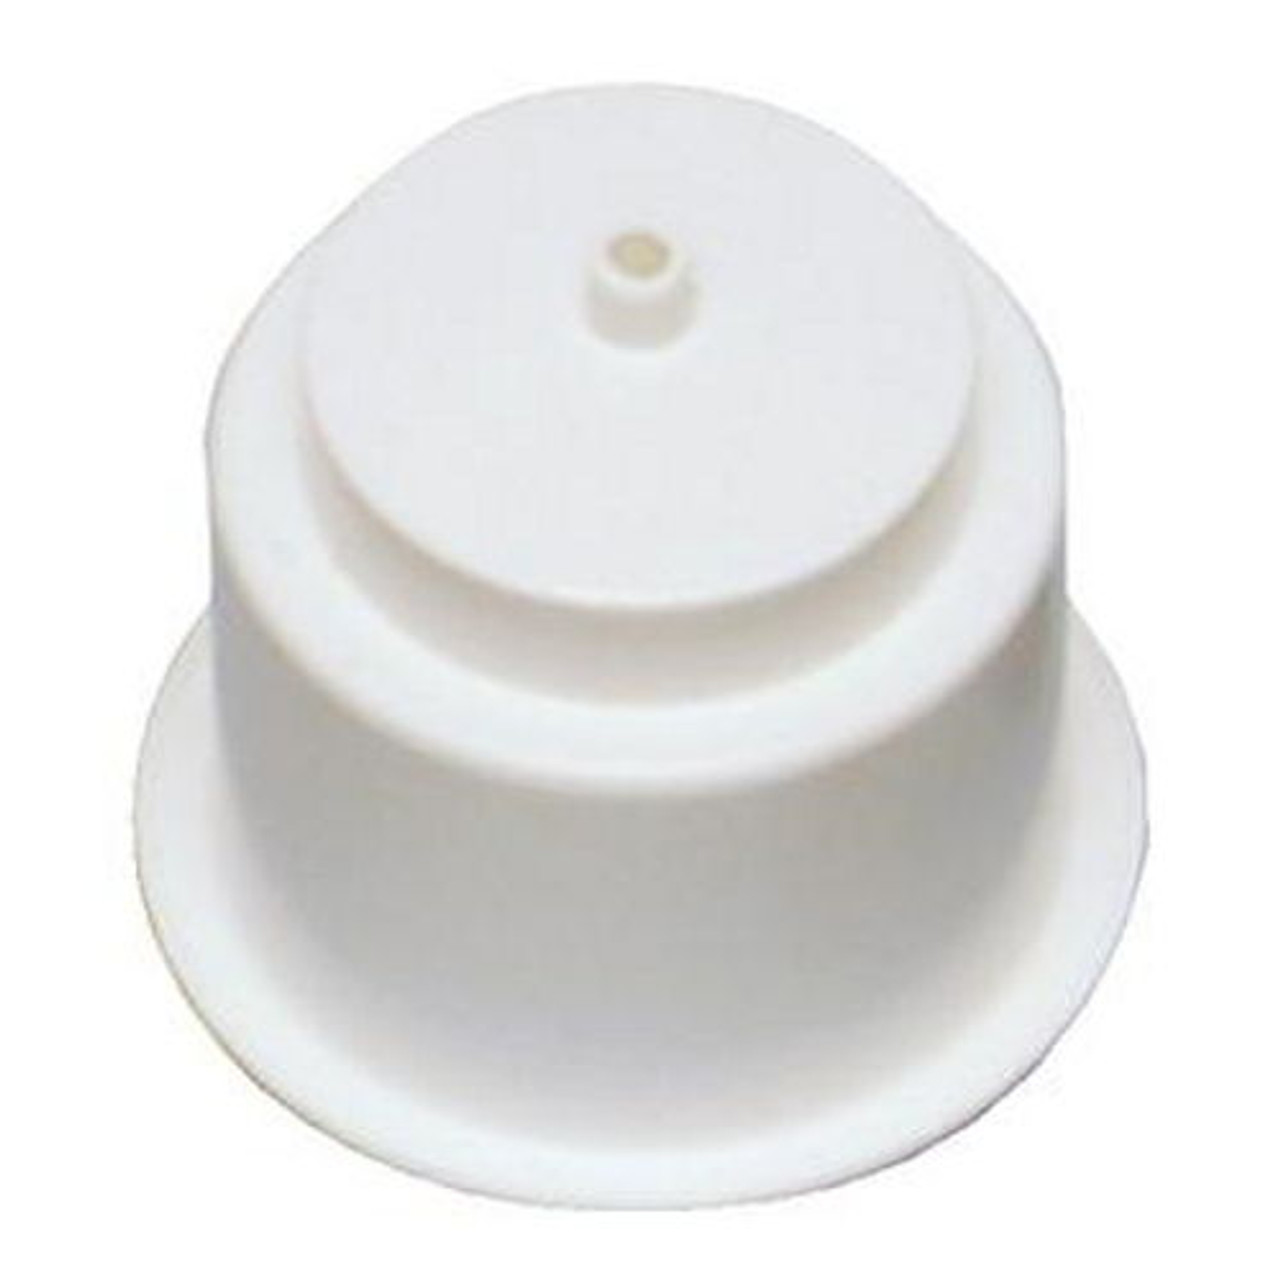 Recessed Mount White Plastic Drink Holder for Boats - Fits 3-3/4 Inch Hole